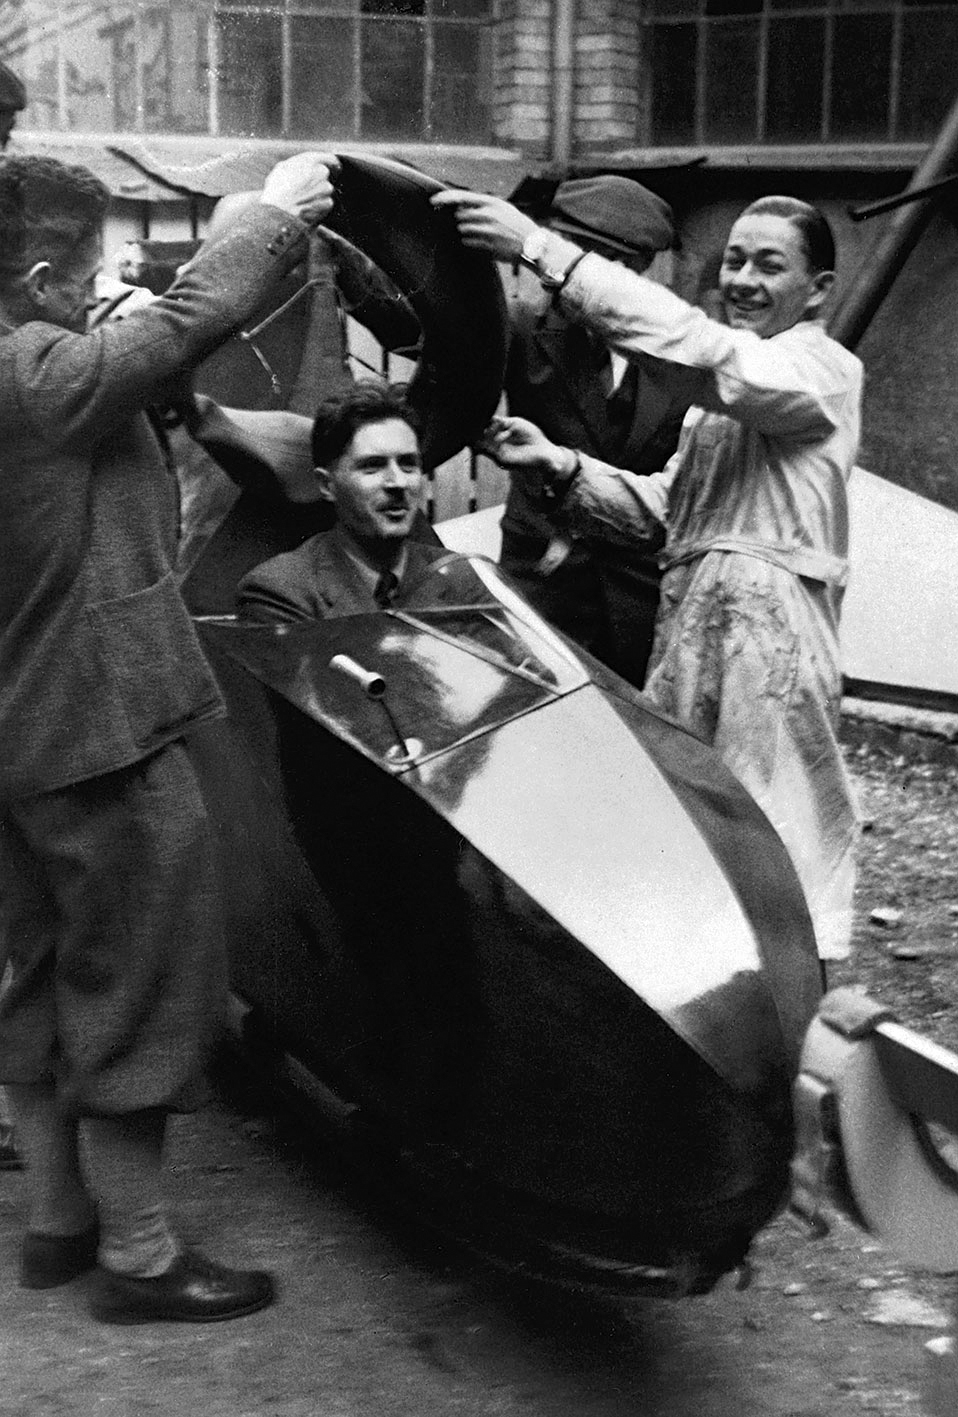 Jean Prouvé testing the cockpit of a glider built by an apprentice in the Rue des Jardiniers workshop, ca. 1936.